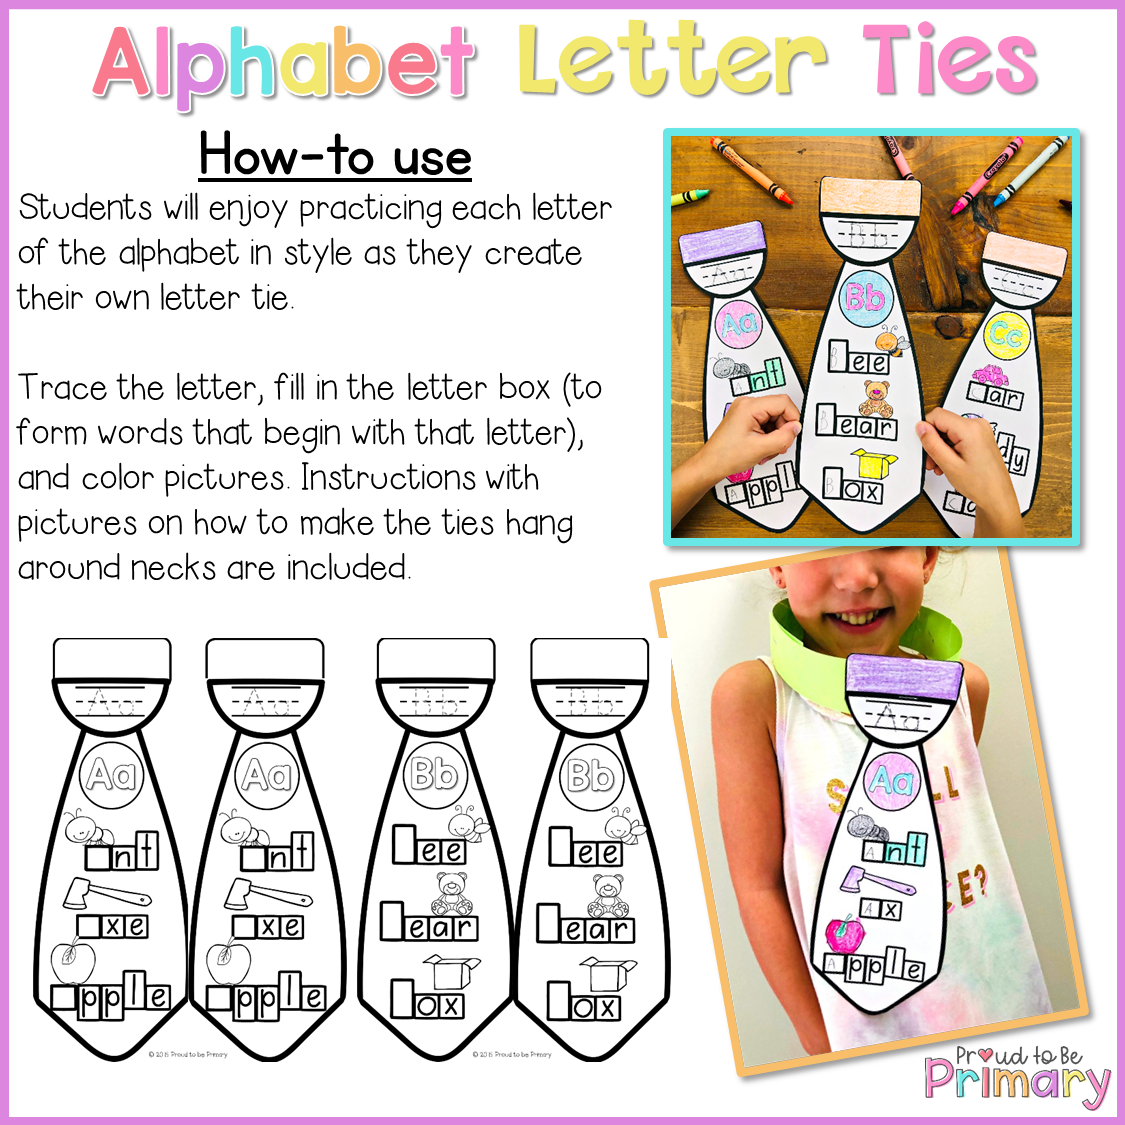 Alphabet Letter Ties - Proud to be Primary